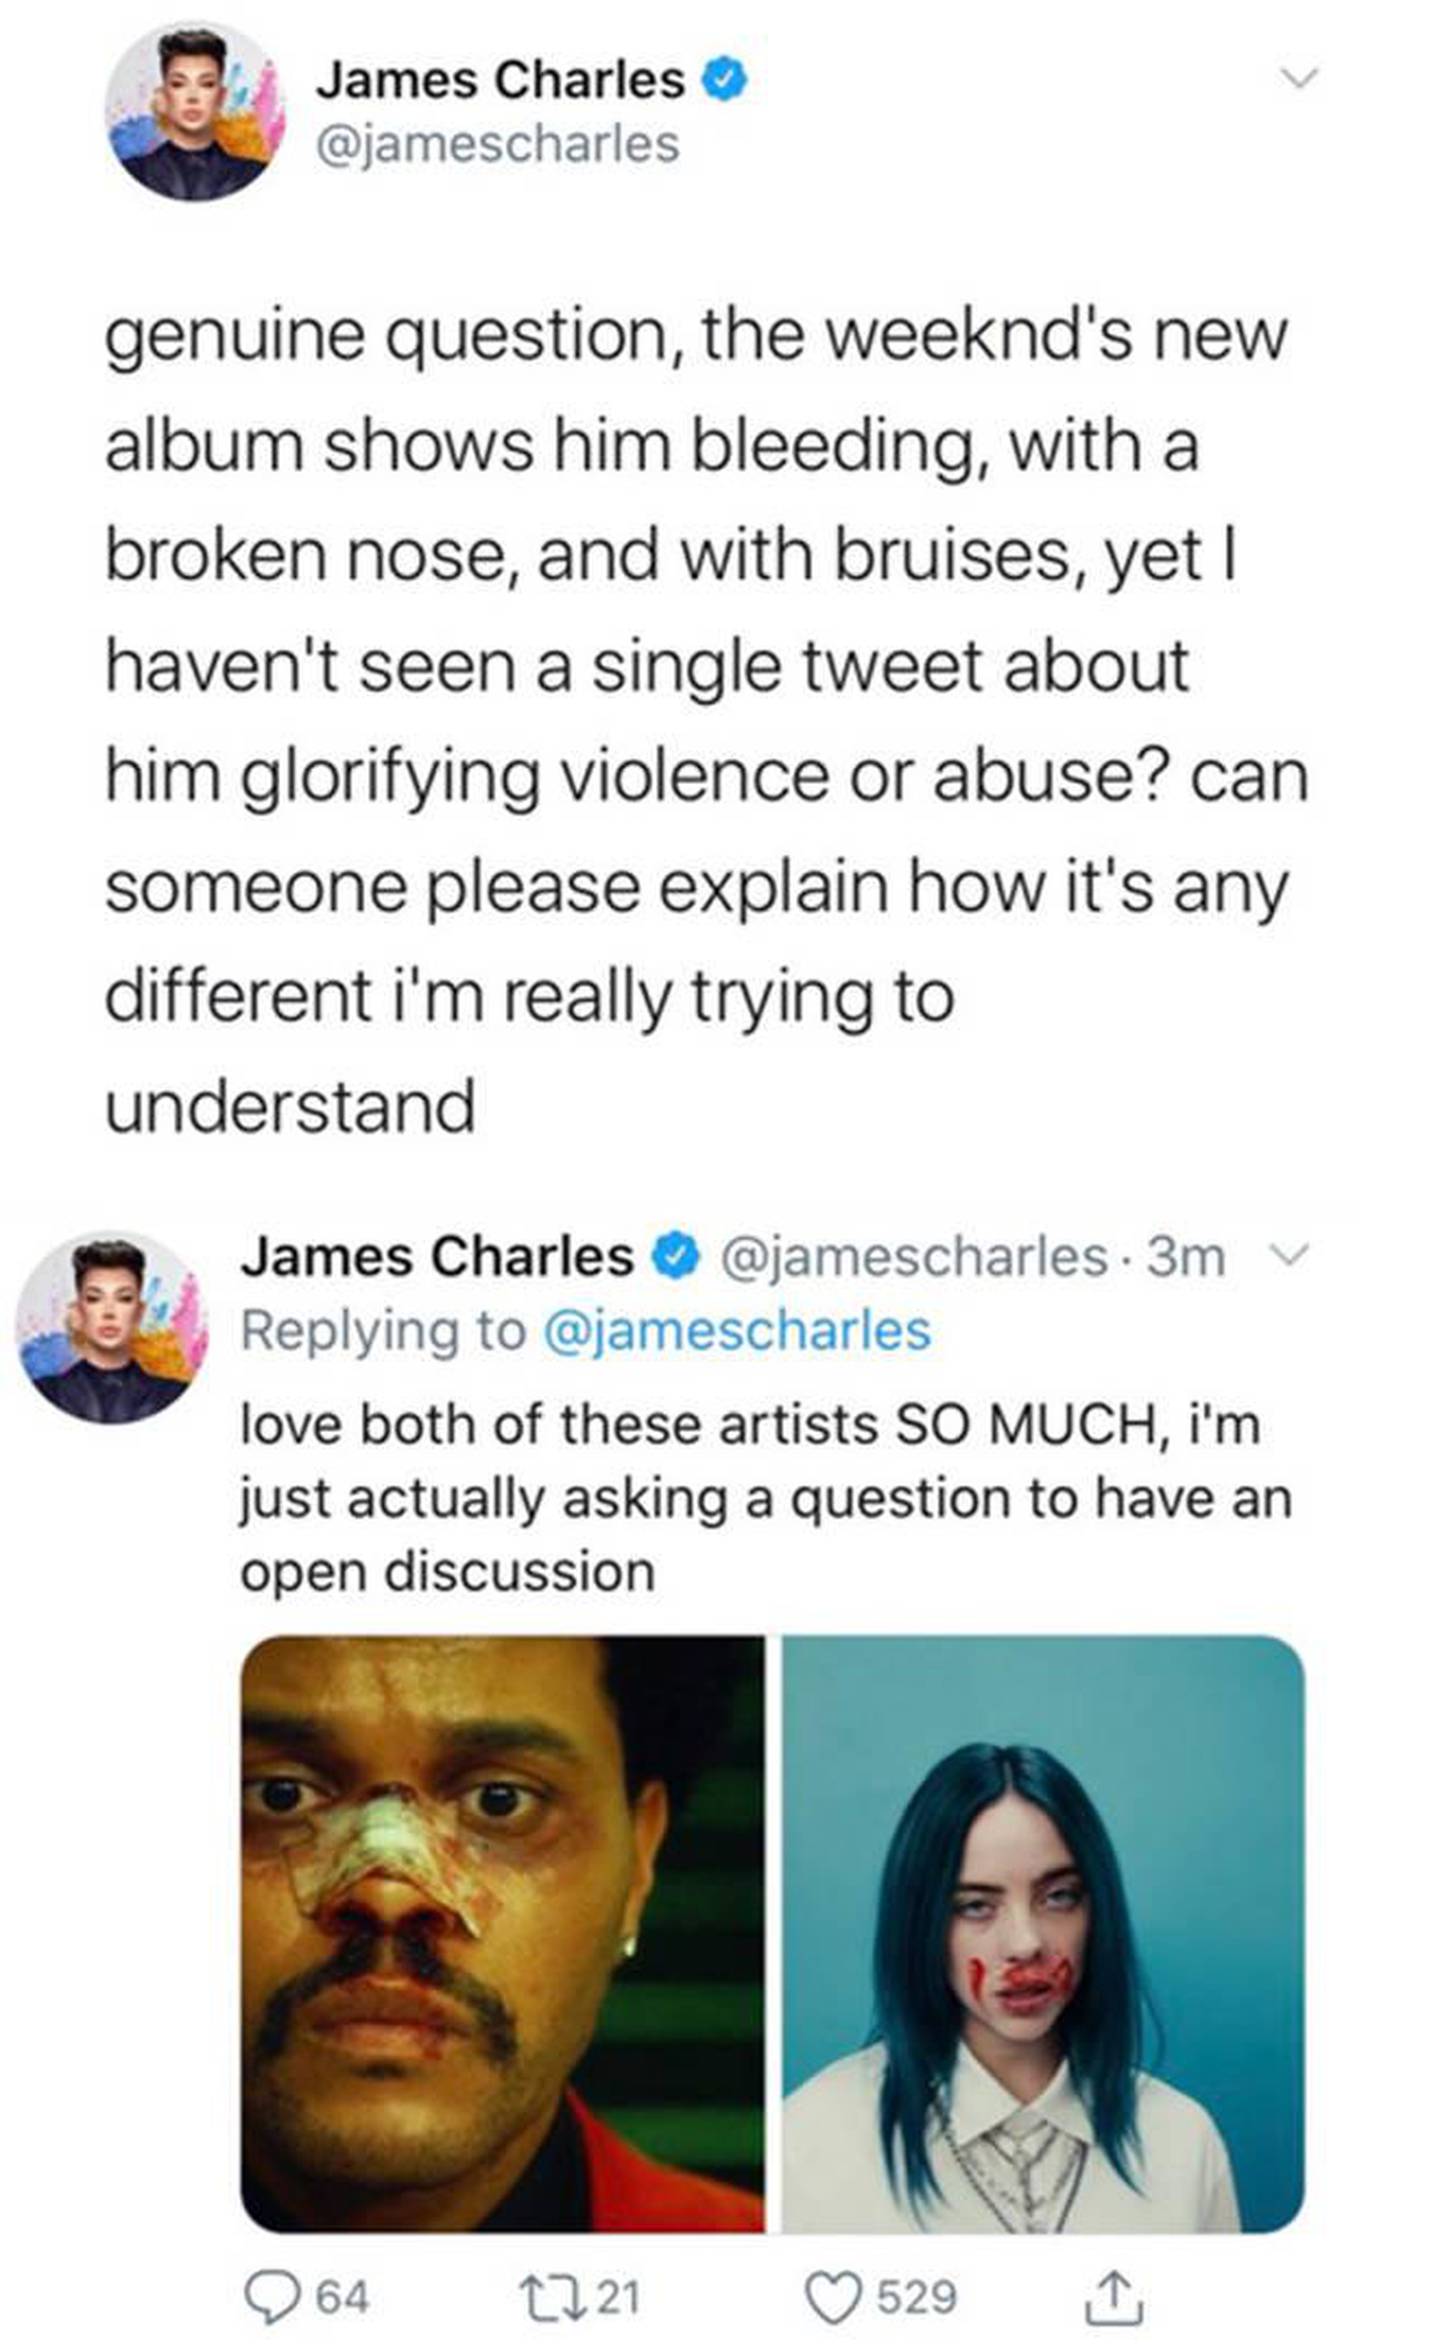 James Charles compared the challenge to images used by popstars The Weeknd and Billie Eilish. Twitter 